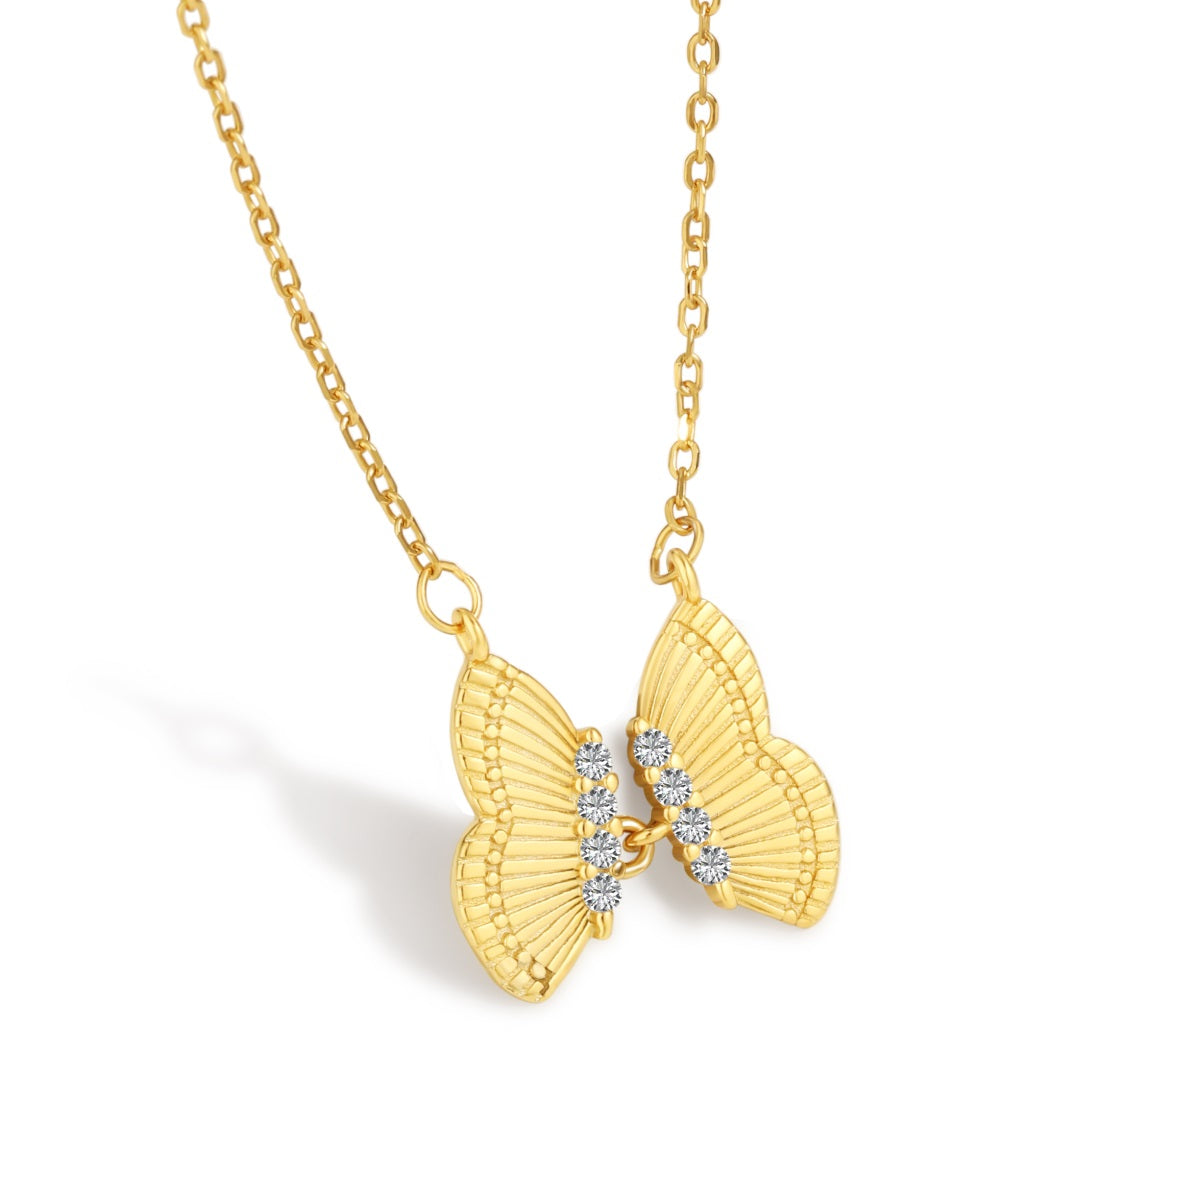 Sterling Silver Butterfly Necklace with CZ Accent - HK Jewels